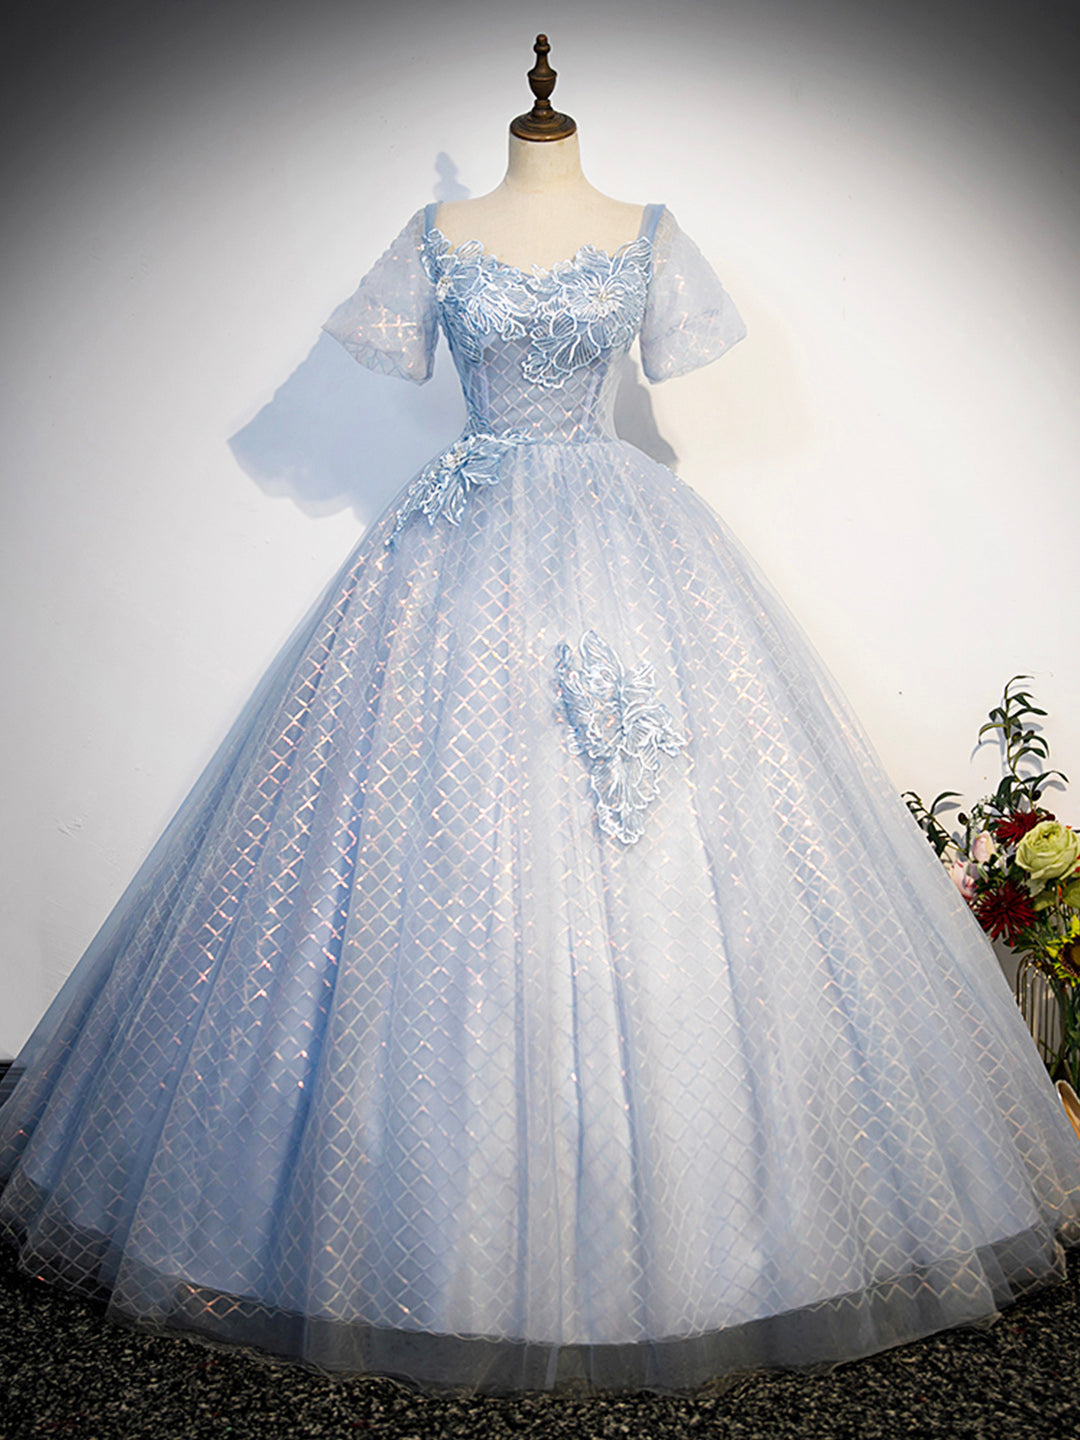 Blue Tulle Lace Long Corset Prom Dress, Shiny A-Line Short Sleeve Evening Dress outfit, Party Dress Australia